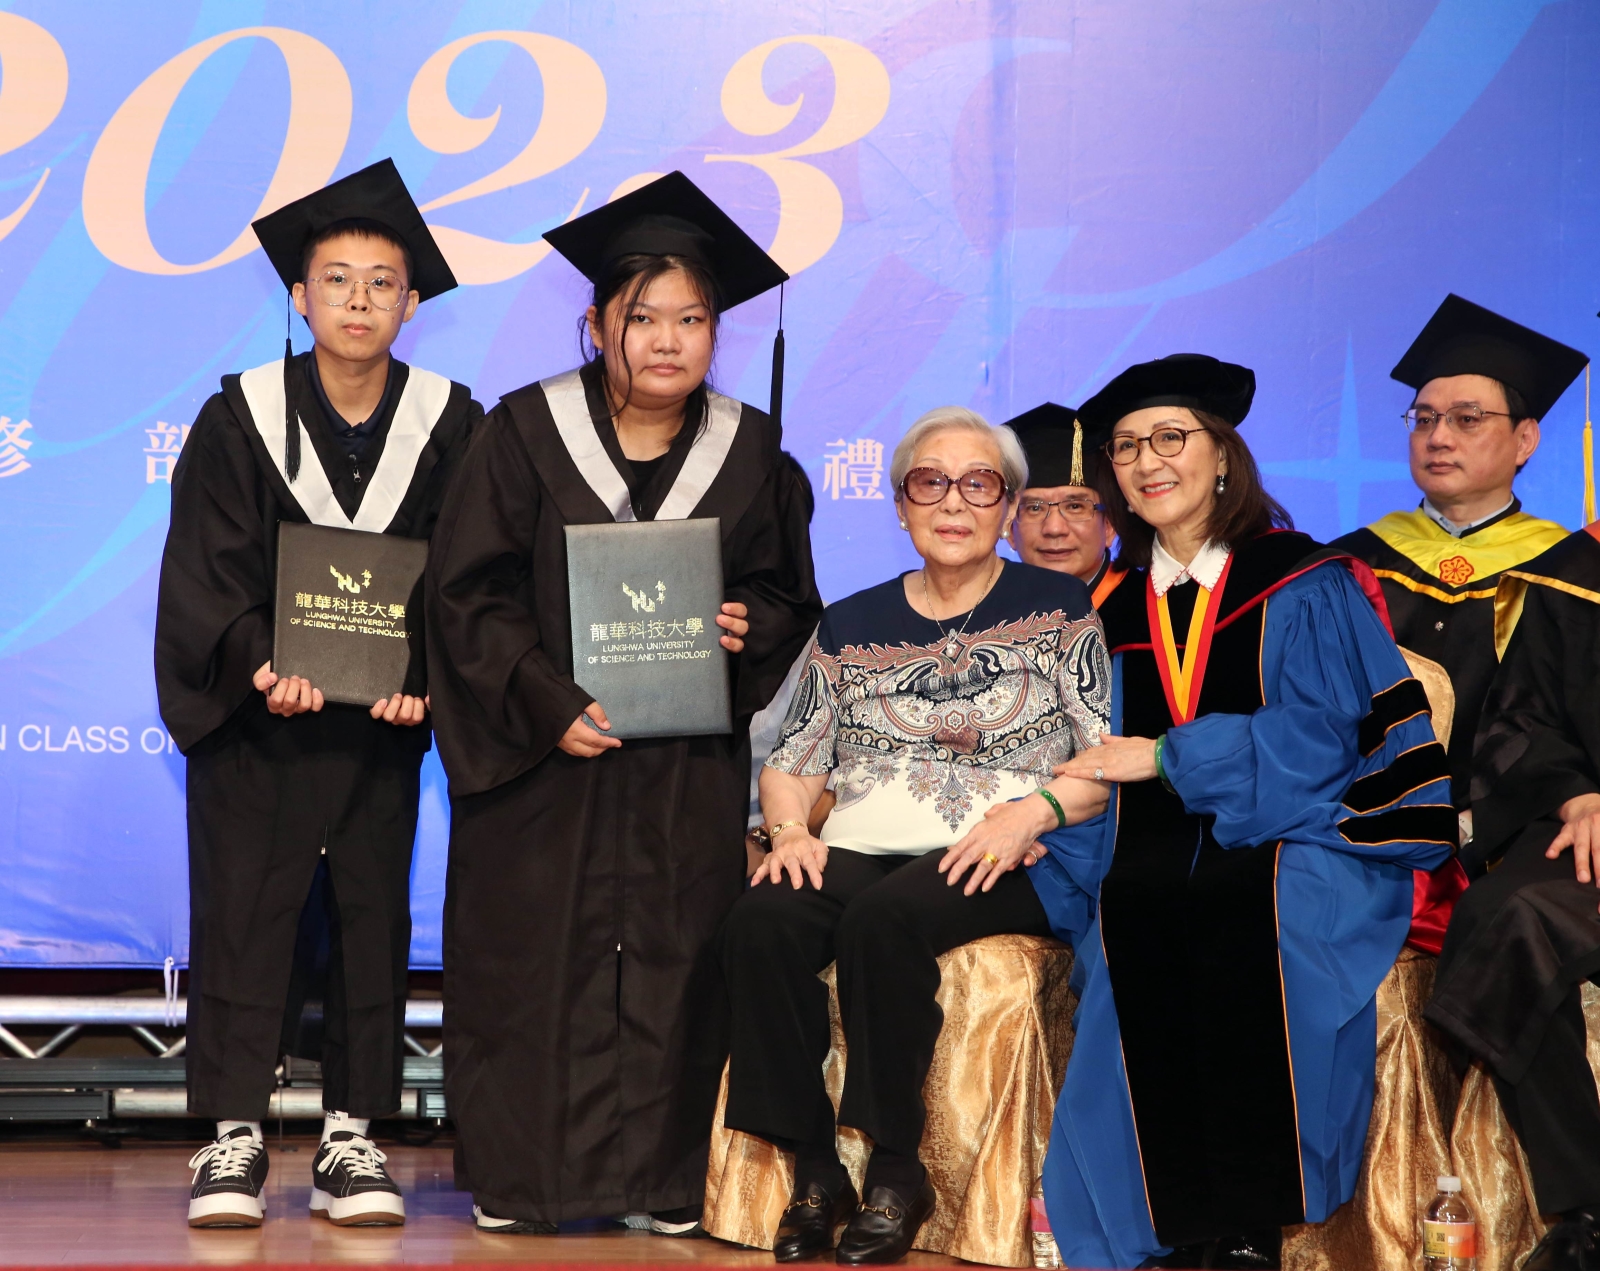 Ms. Shu-Chuan Chen Sun, the founder, presented the C Value Excellence Awards.